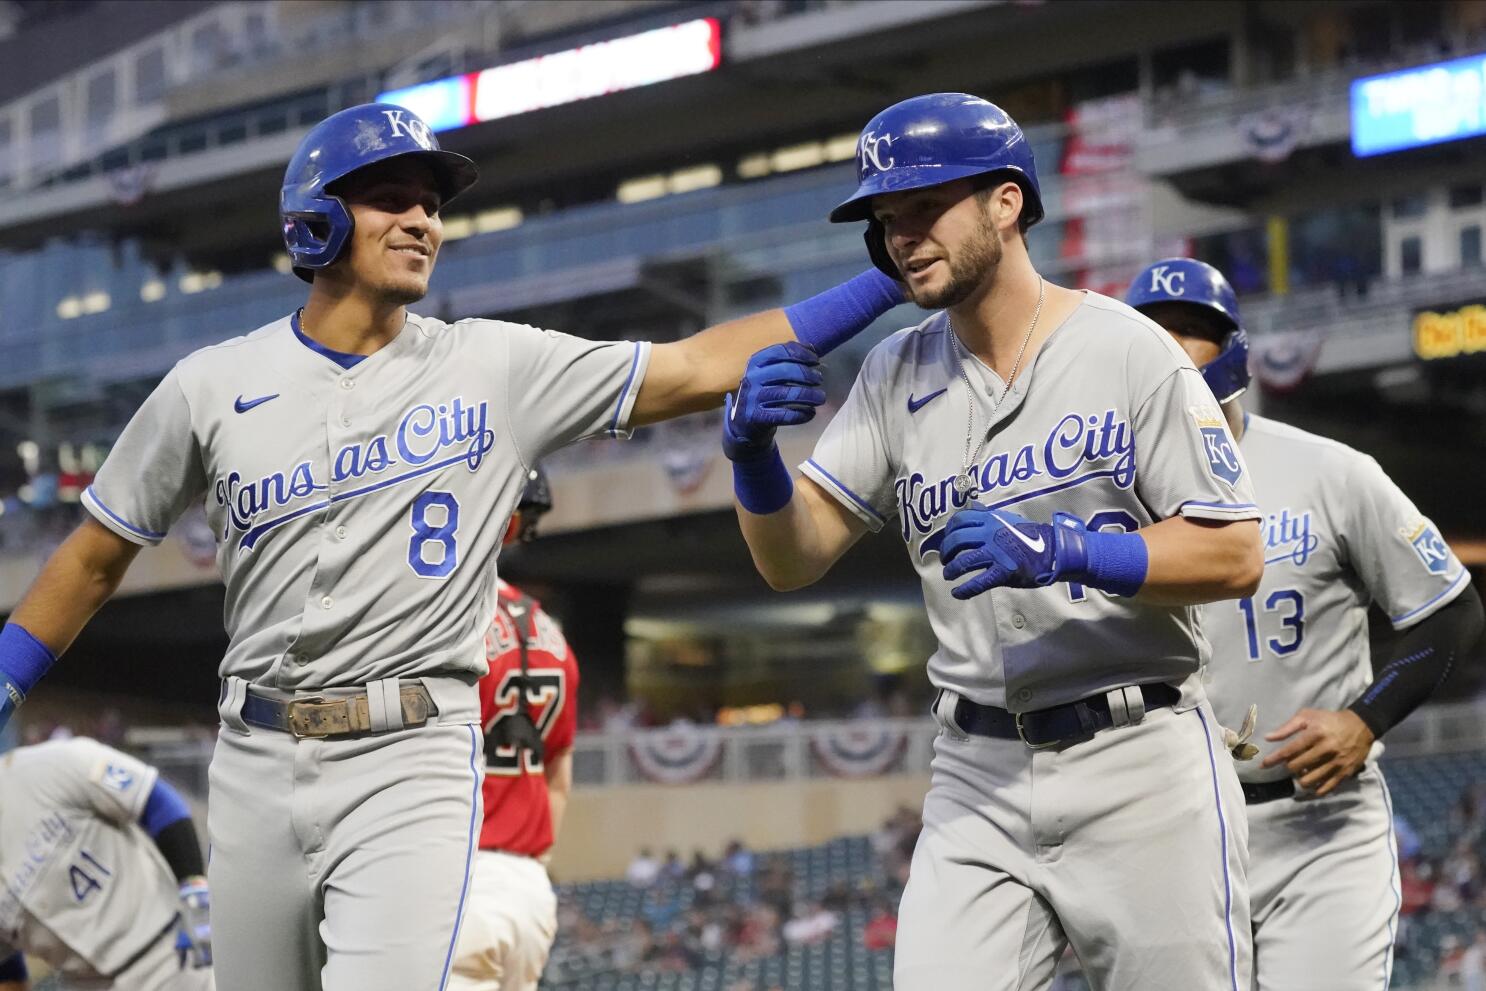 Andrew Benintendi leads Royals with 2 hits, 3 RBIs